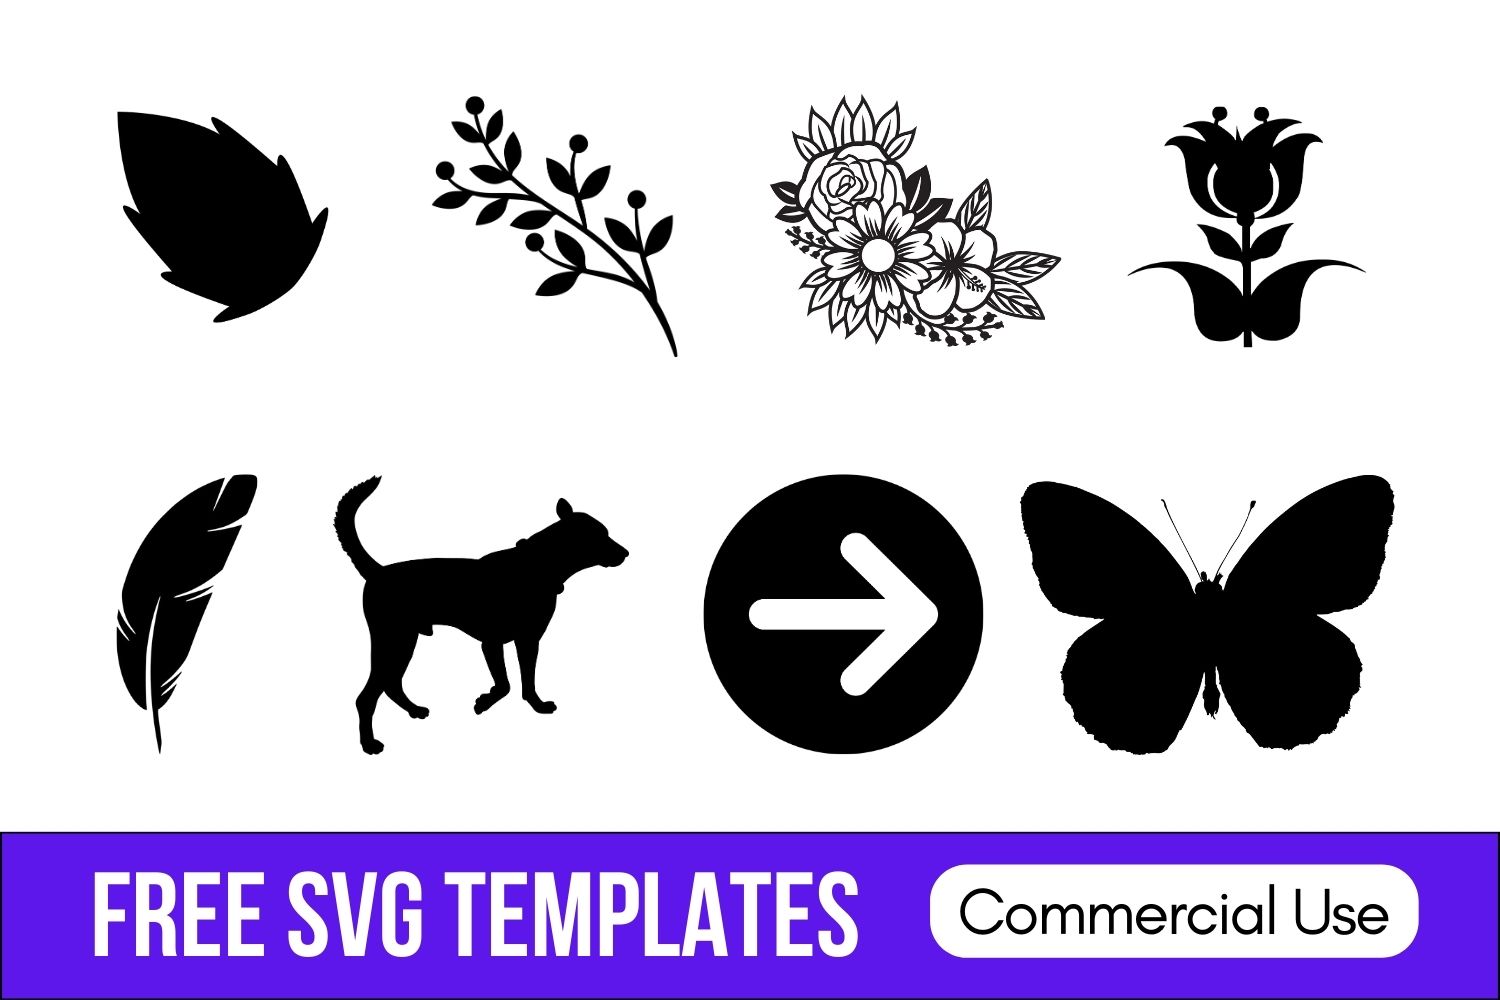 design elements, ornaments, svg templates, patterns, cliparts, cricut cut file, heart svg designs, leaves svg, leaf svgs, dog templates, dinosaur cliparts, Fourth of July, Independence Day svg, New Year, 4th of July SVG, July 4th, Fourth of July, America svg,